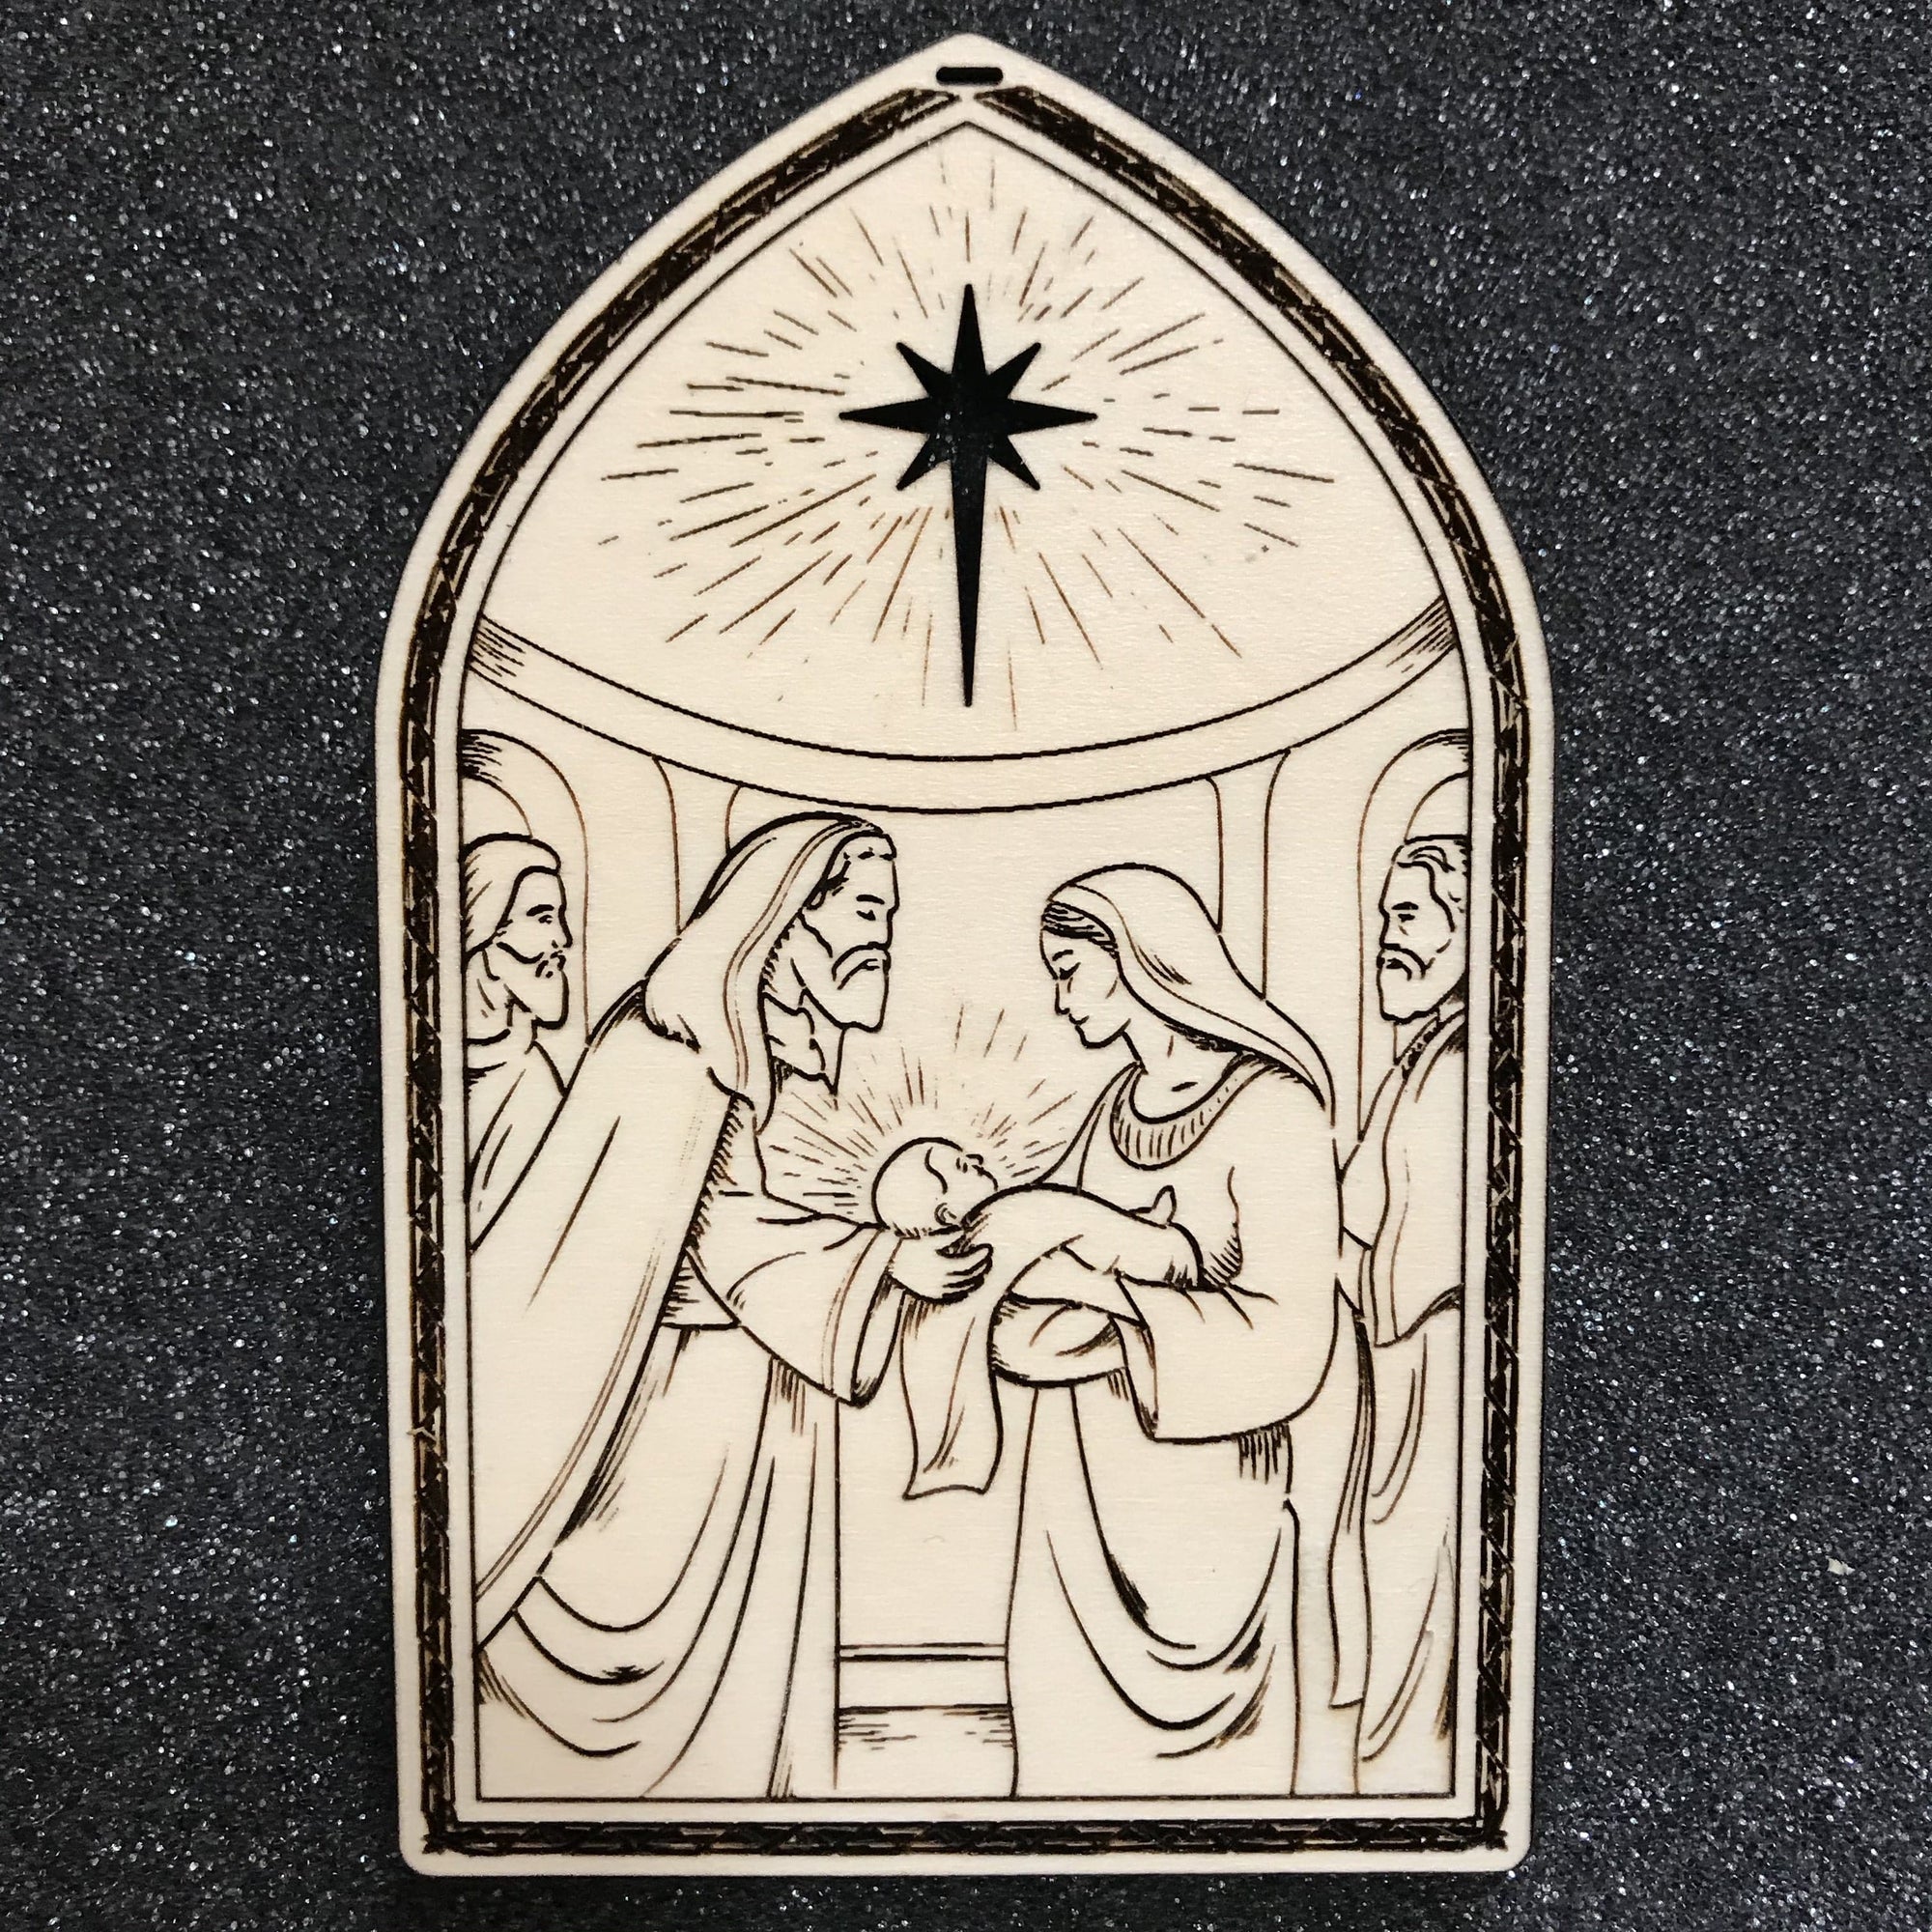 Ad Crucem Christmas Ornament - Presentation of the Christ Child at the Temple